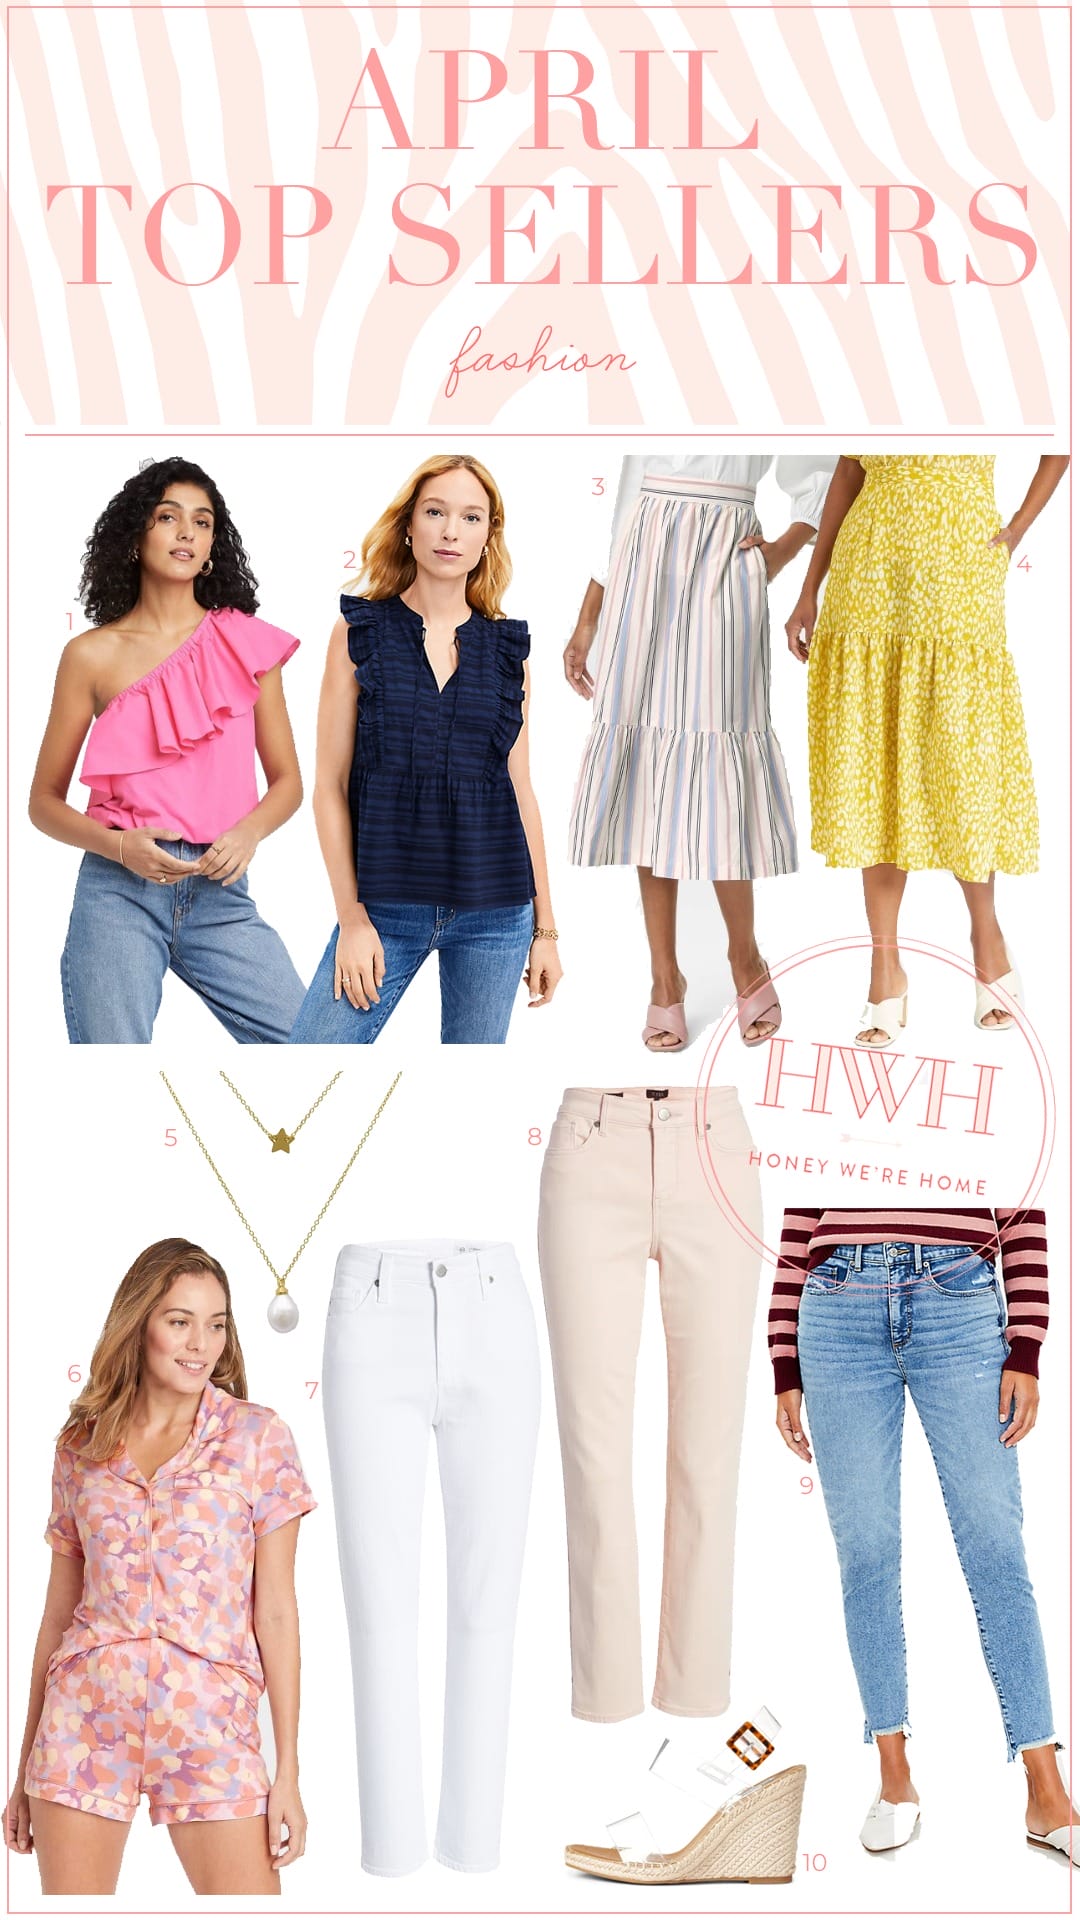 April Top Sellers Fashion 